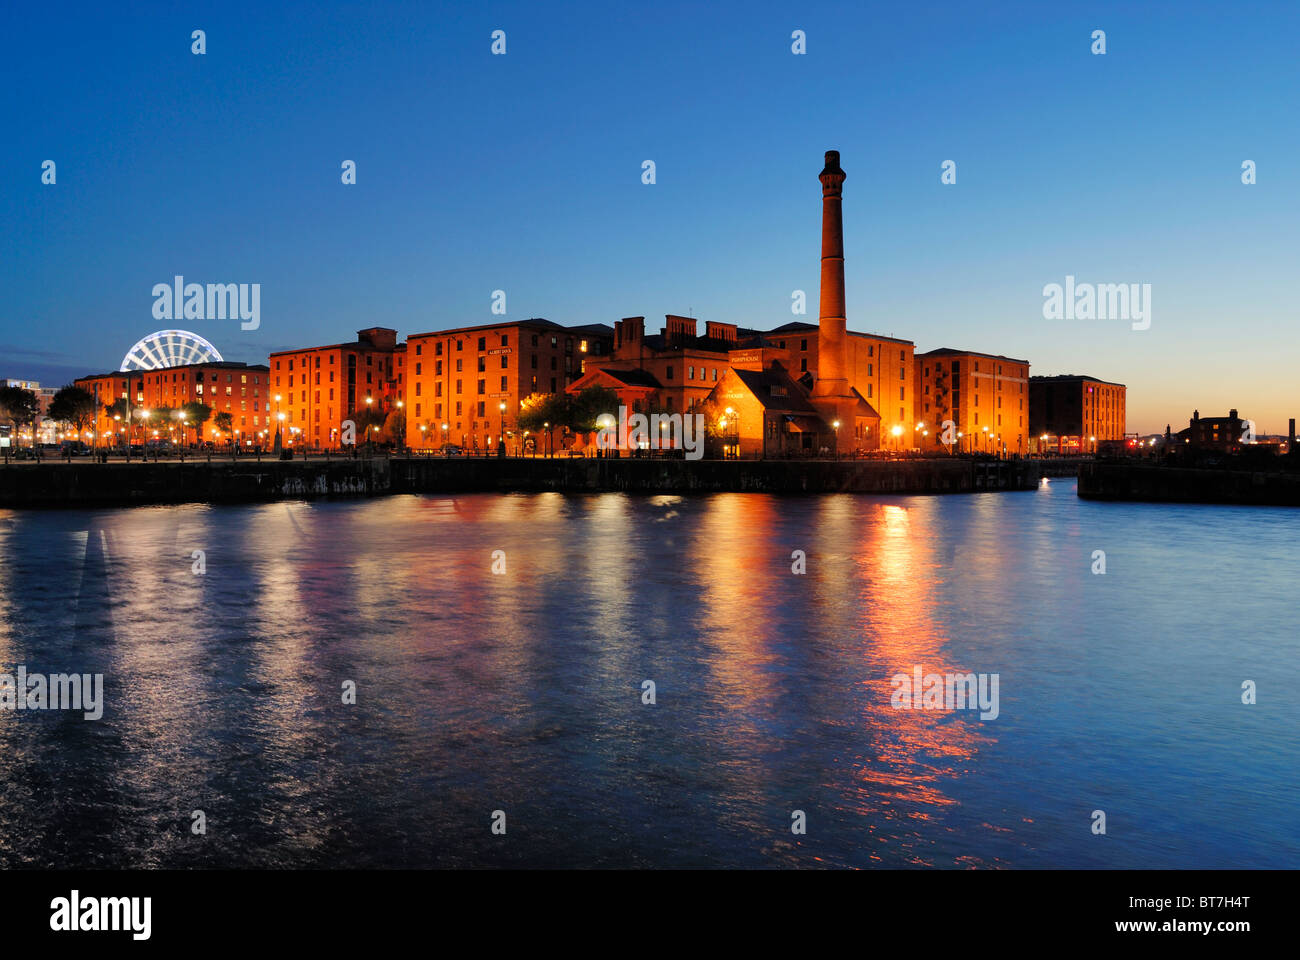 The buildings of the redeveloped Albert Dock complex in Liverpool as seen across Canning Dock. Stock Photo